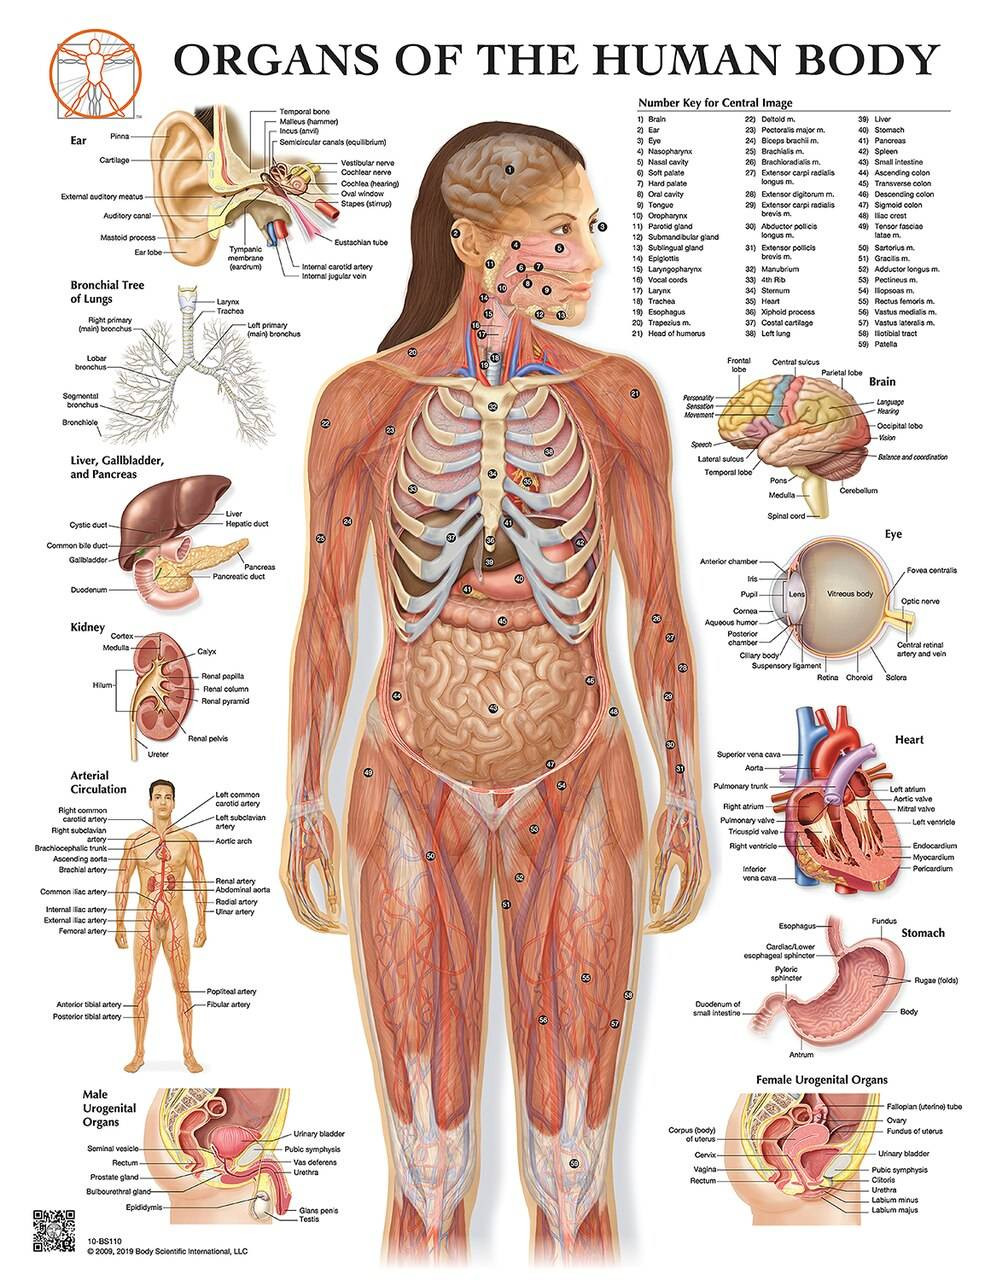 Organs Of The Human Body Laminated Anatomical Wall Chart With Digital Download Code